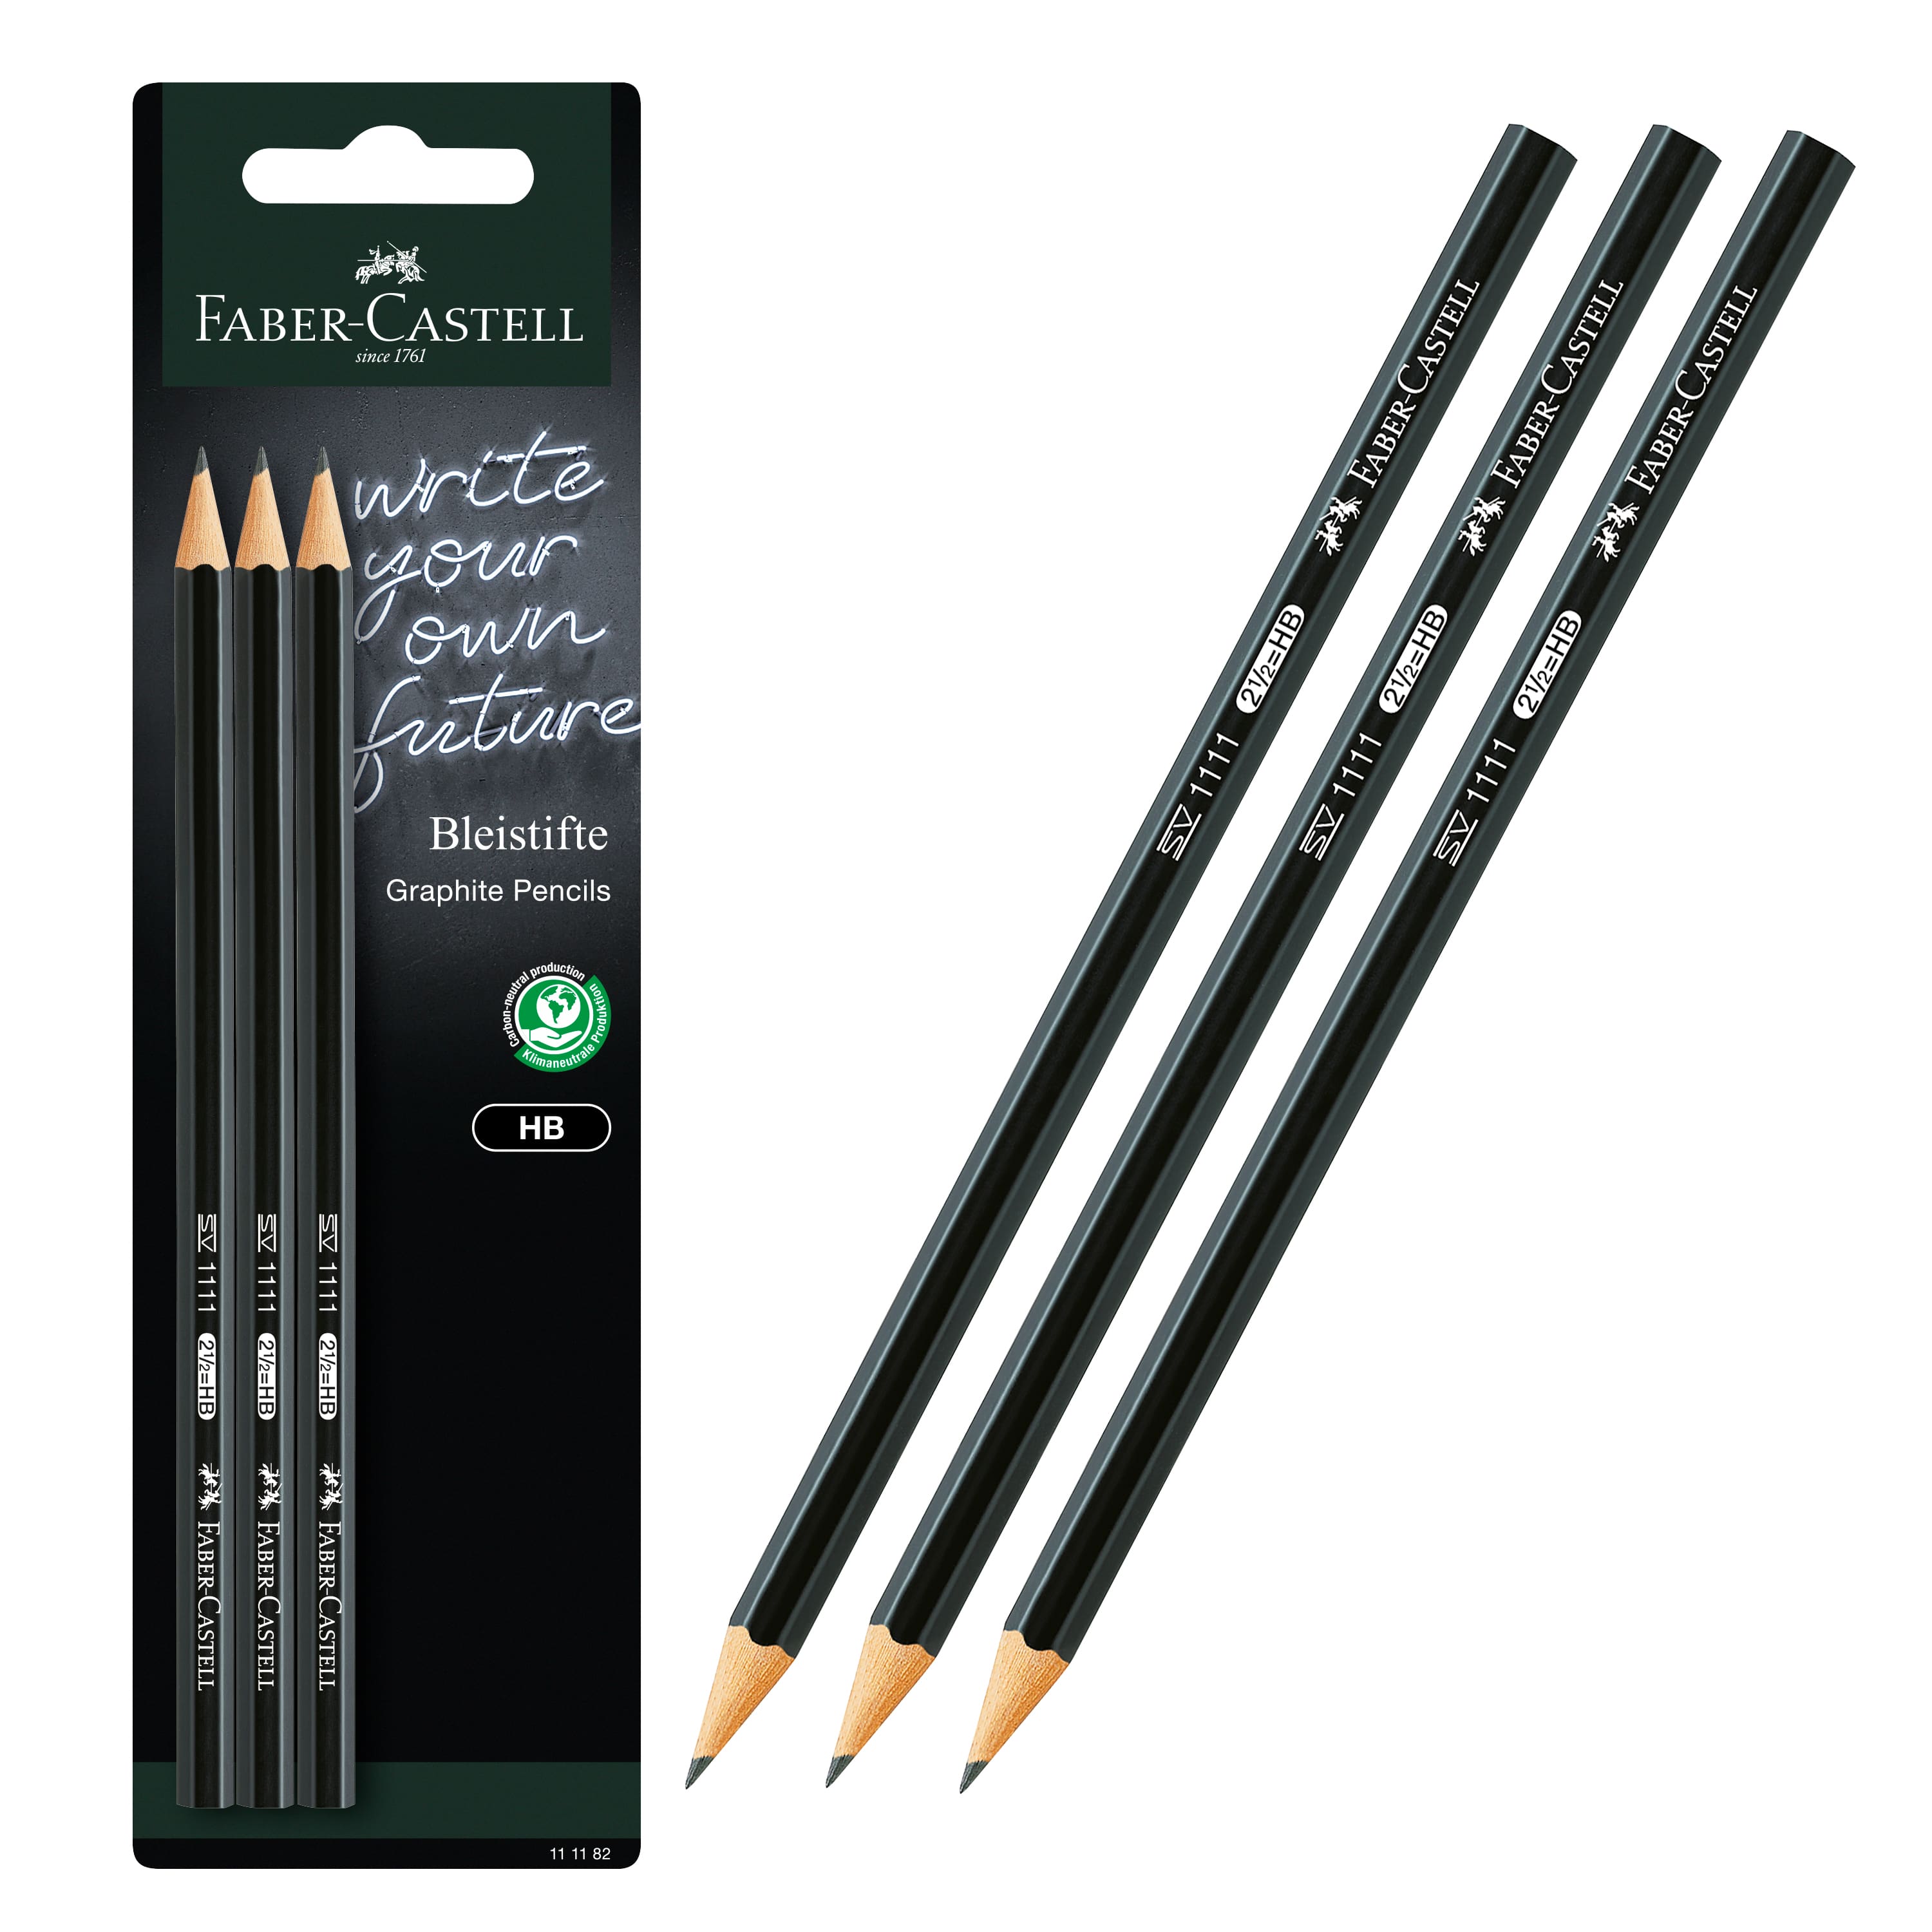 Corslet 50 Pc HB Pencils Sketch Pencil Set for Drawing  Pencil Sketching With Sketch Book - 50 Pc HB Pencils Sketch Pencil Set for  Drawing Pencil Sketching With Sketch Book